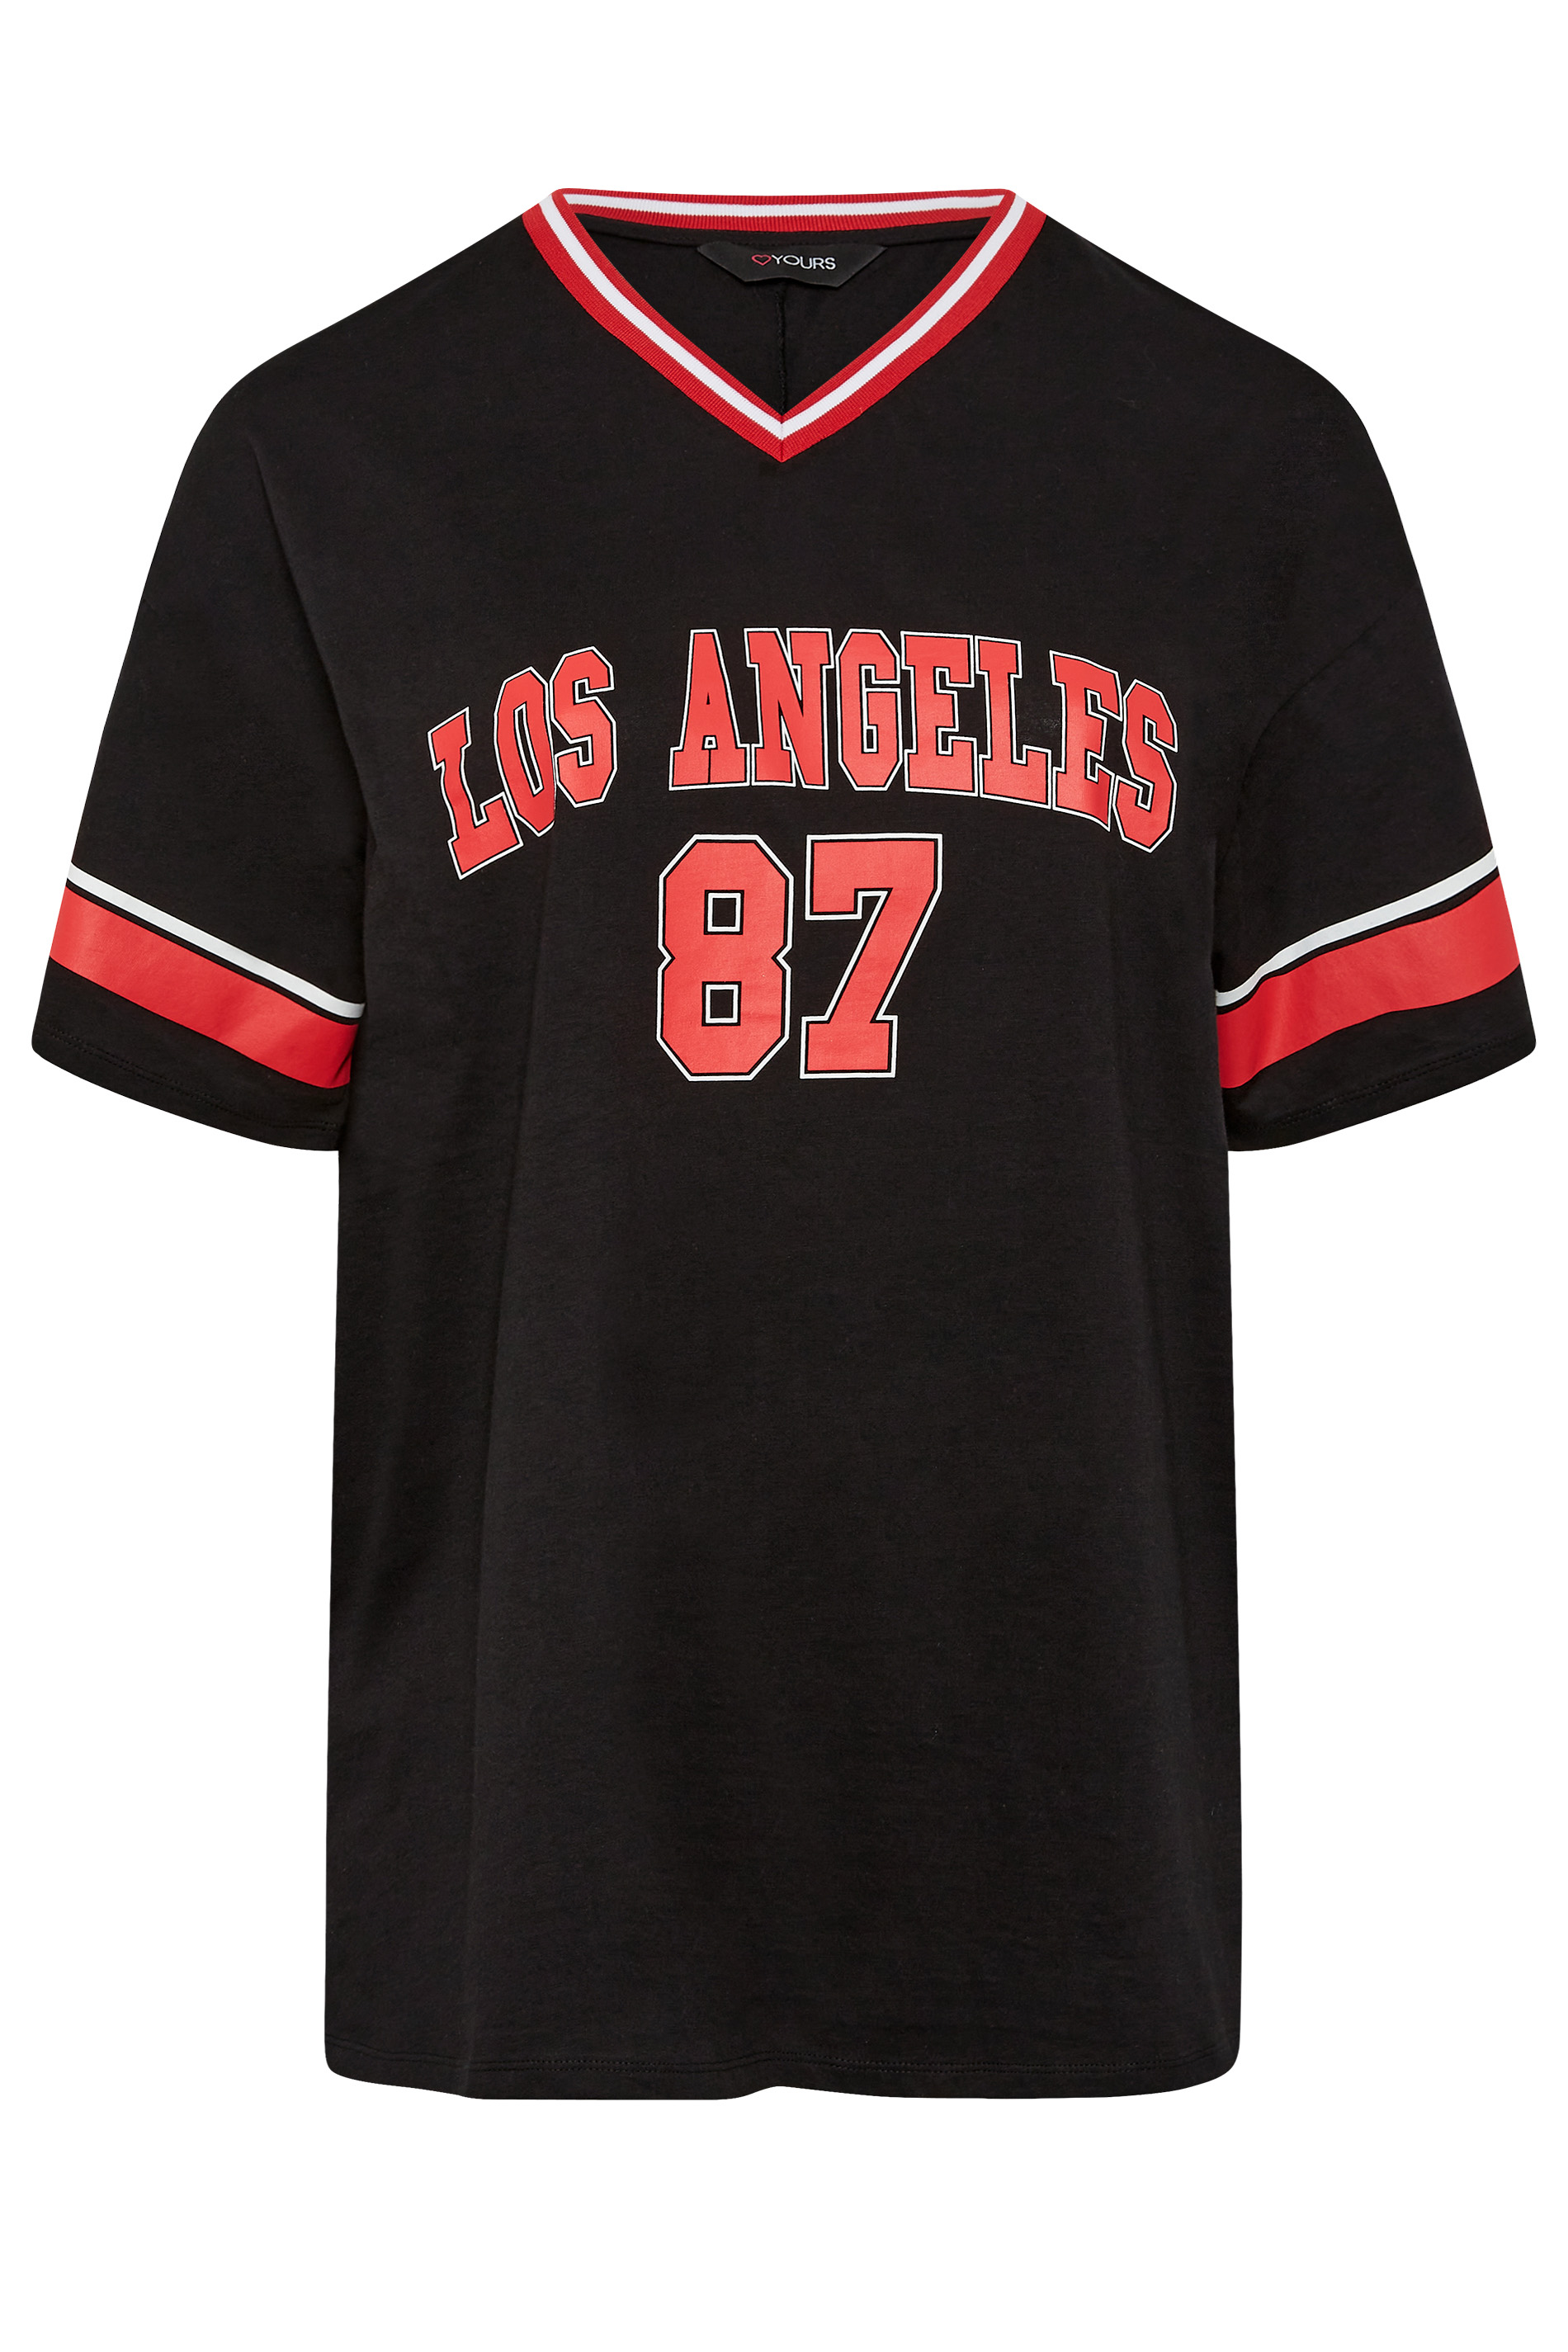  Los Angeles Varsity Style Black with Black Text T-Shirt :  Sports & Outdoors